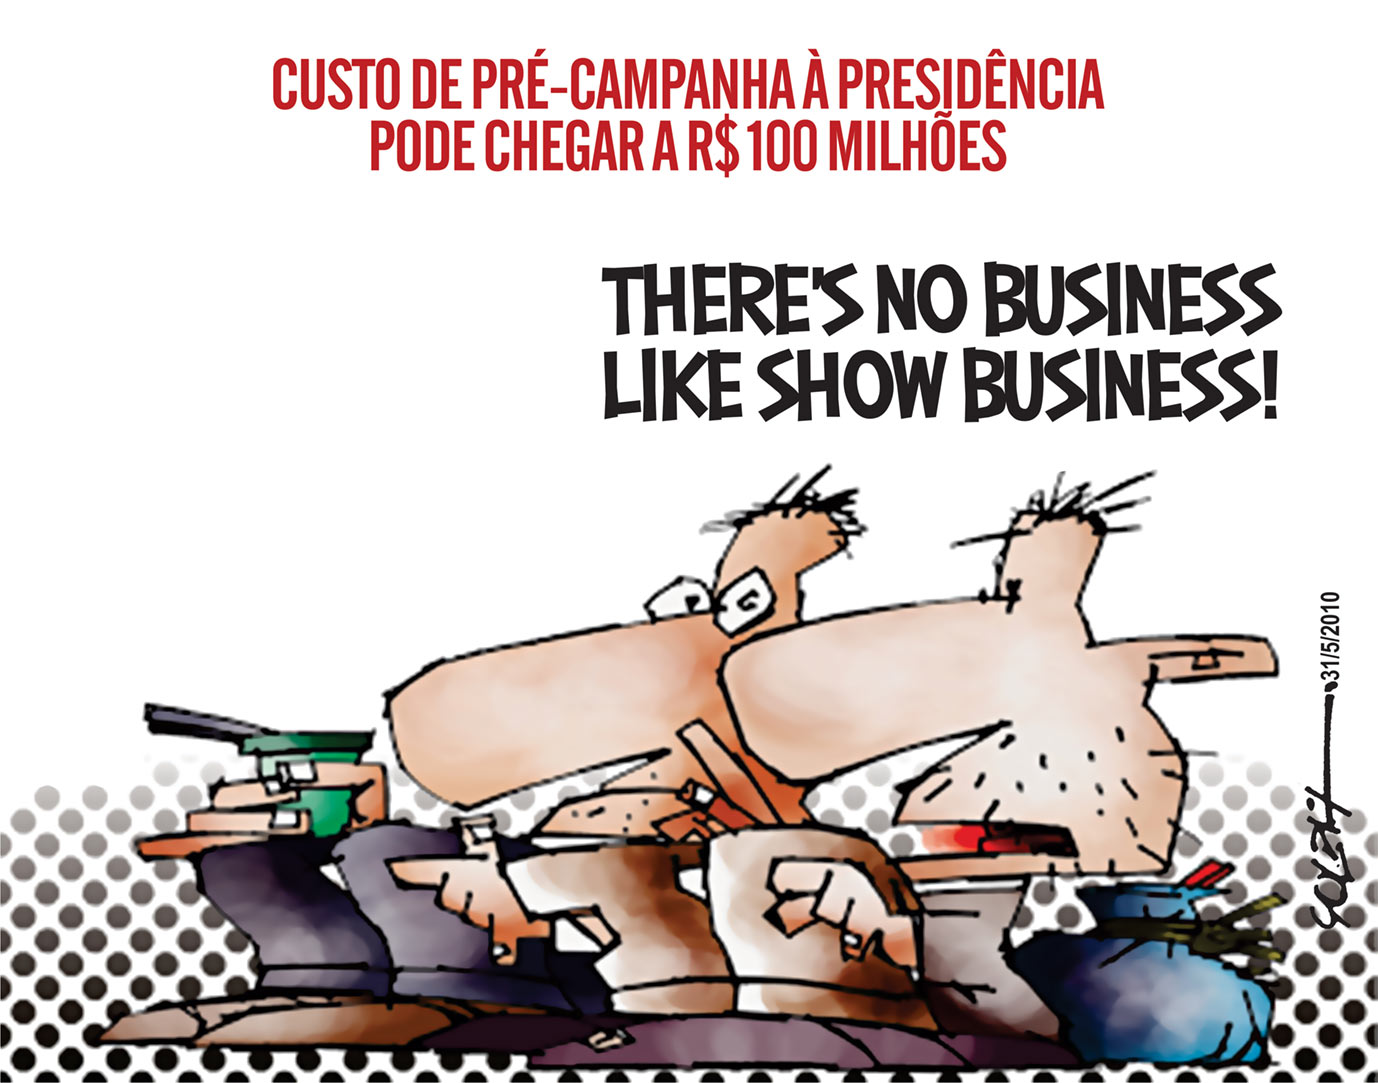 business-31-5-2010